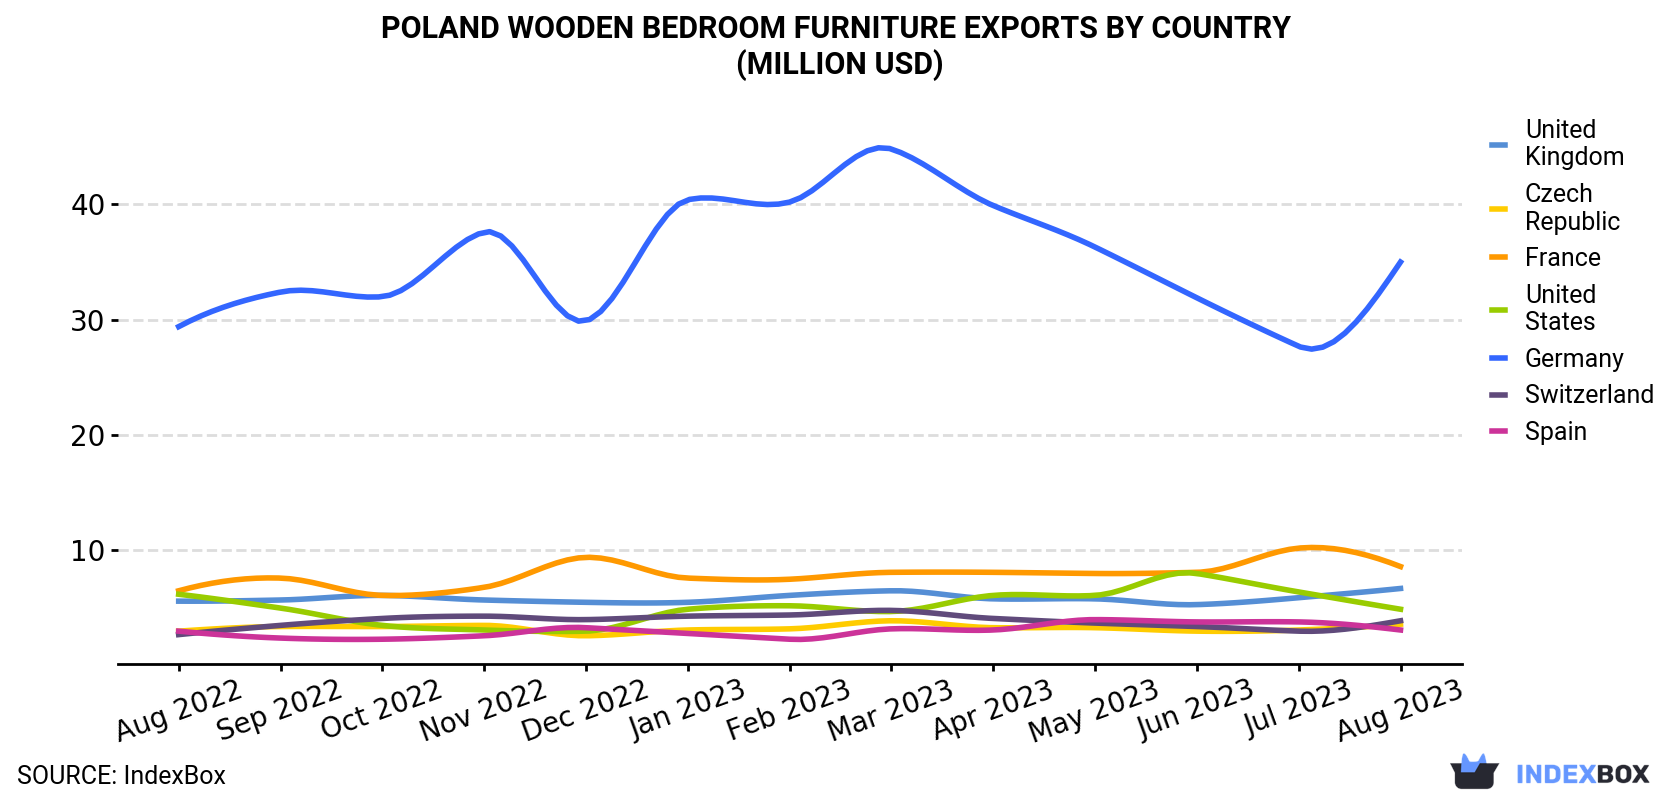 Poland Wooden Bedroom Furniture Exports By Country (Million USD)